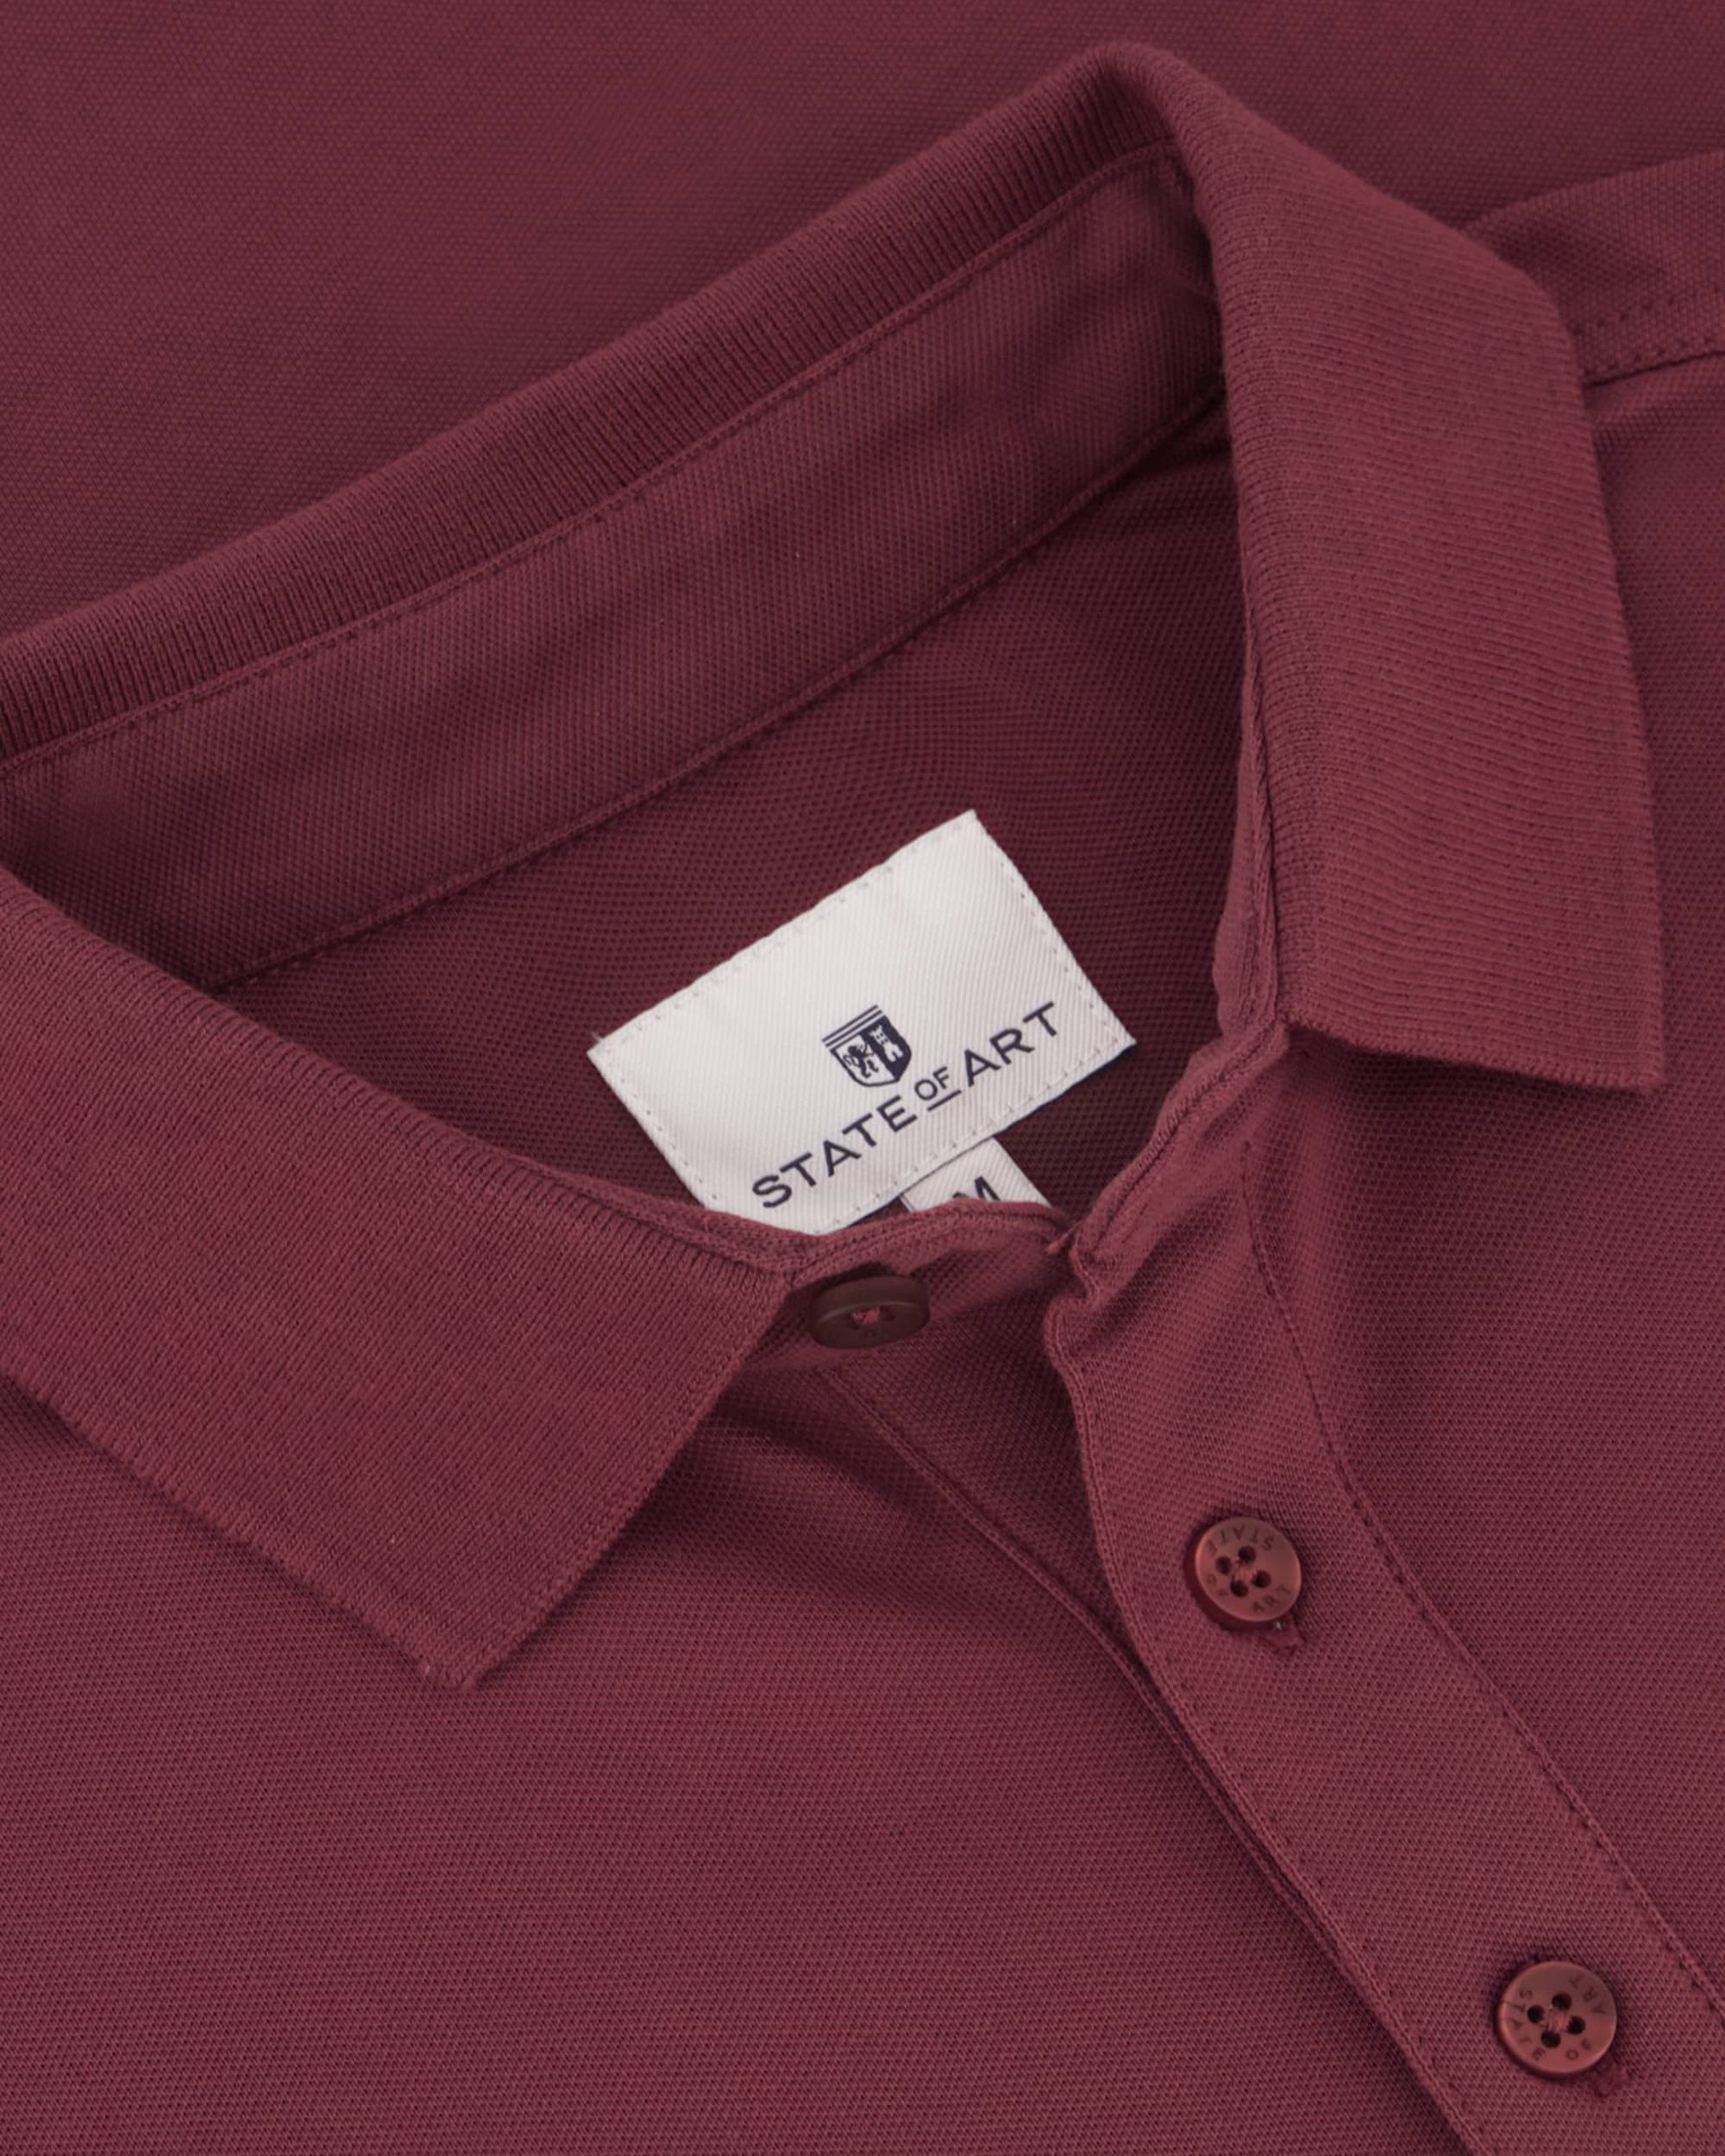 State of Art Polo KM Donker rood 093440-001-4XL